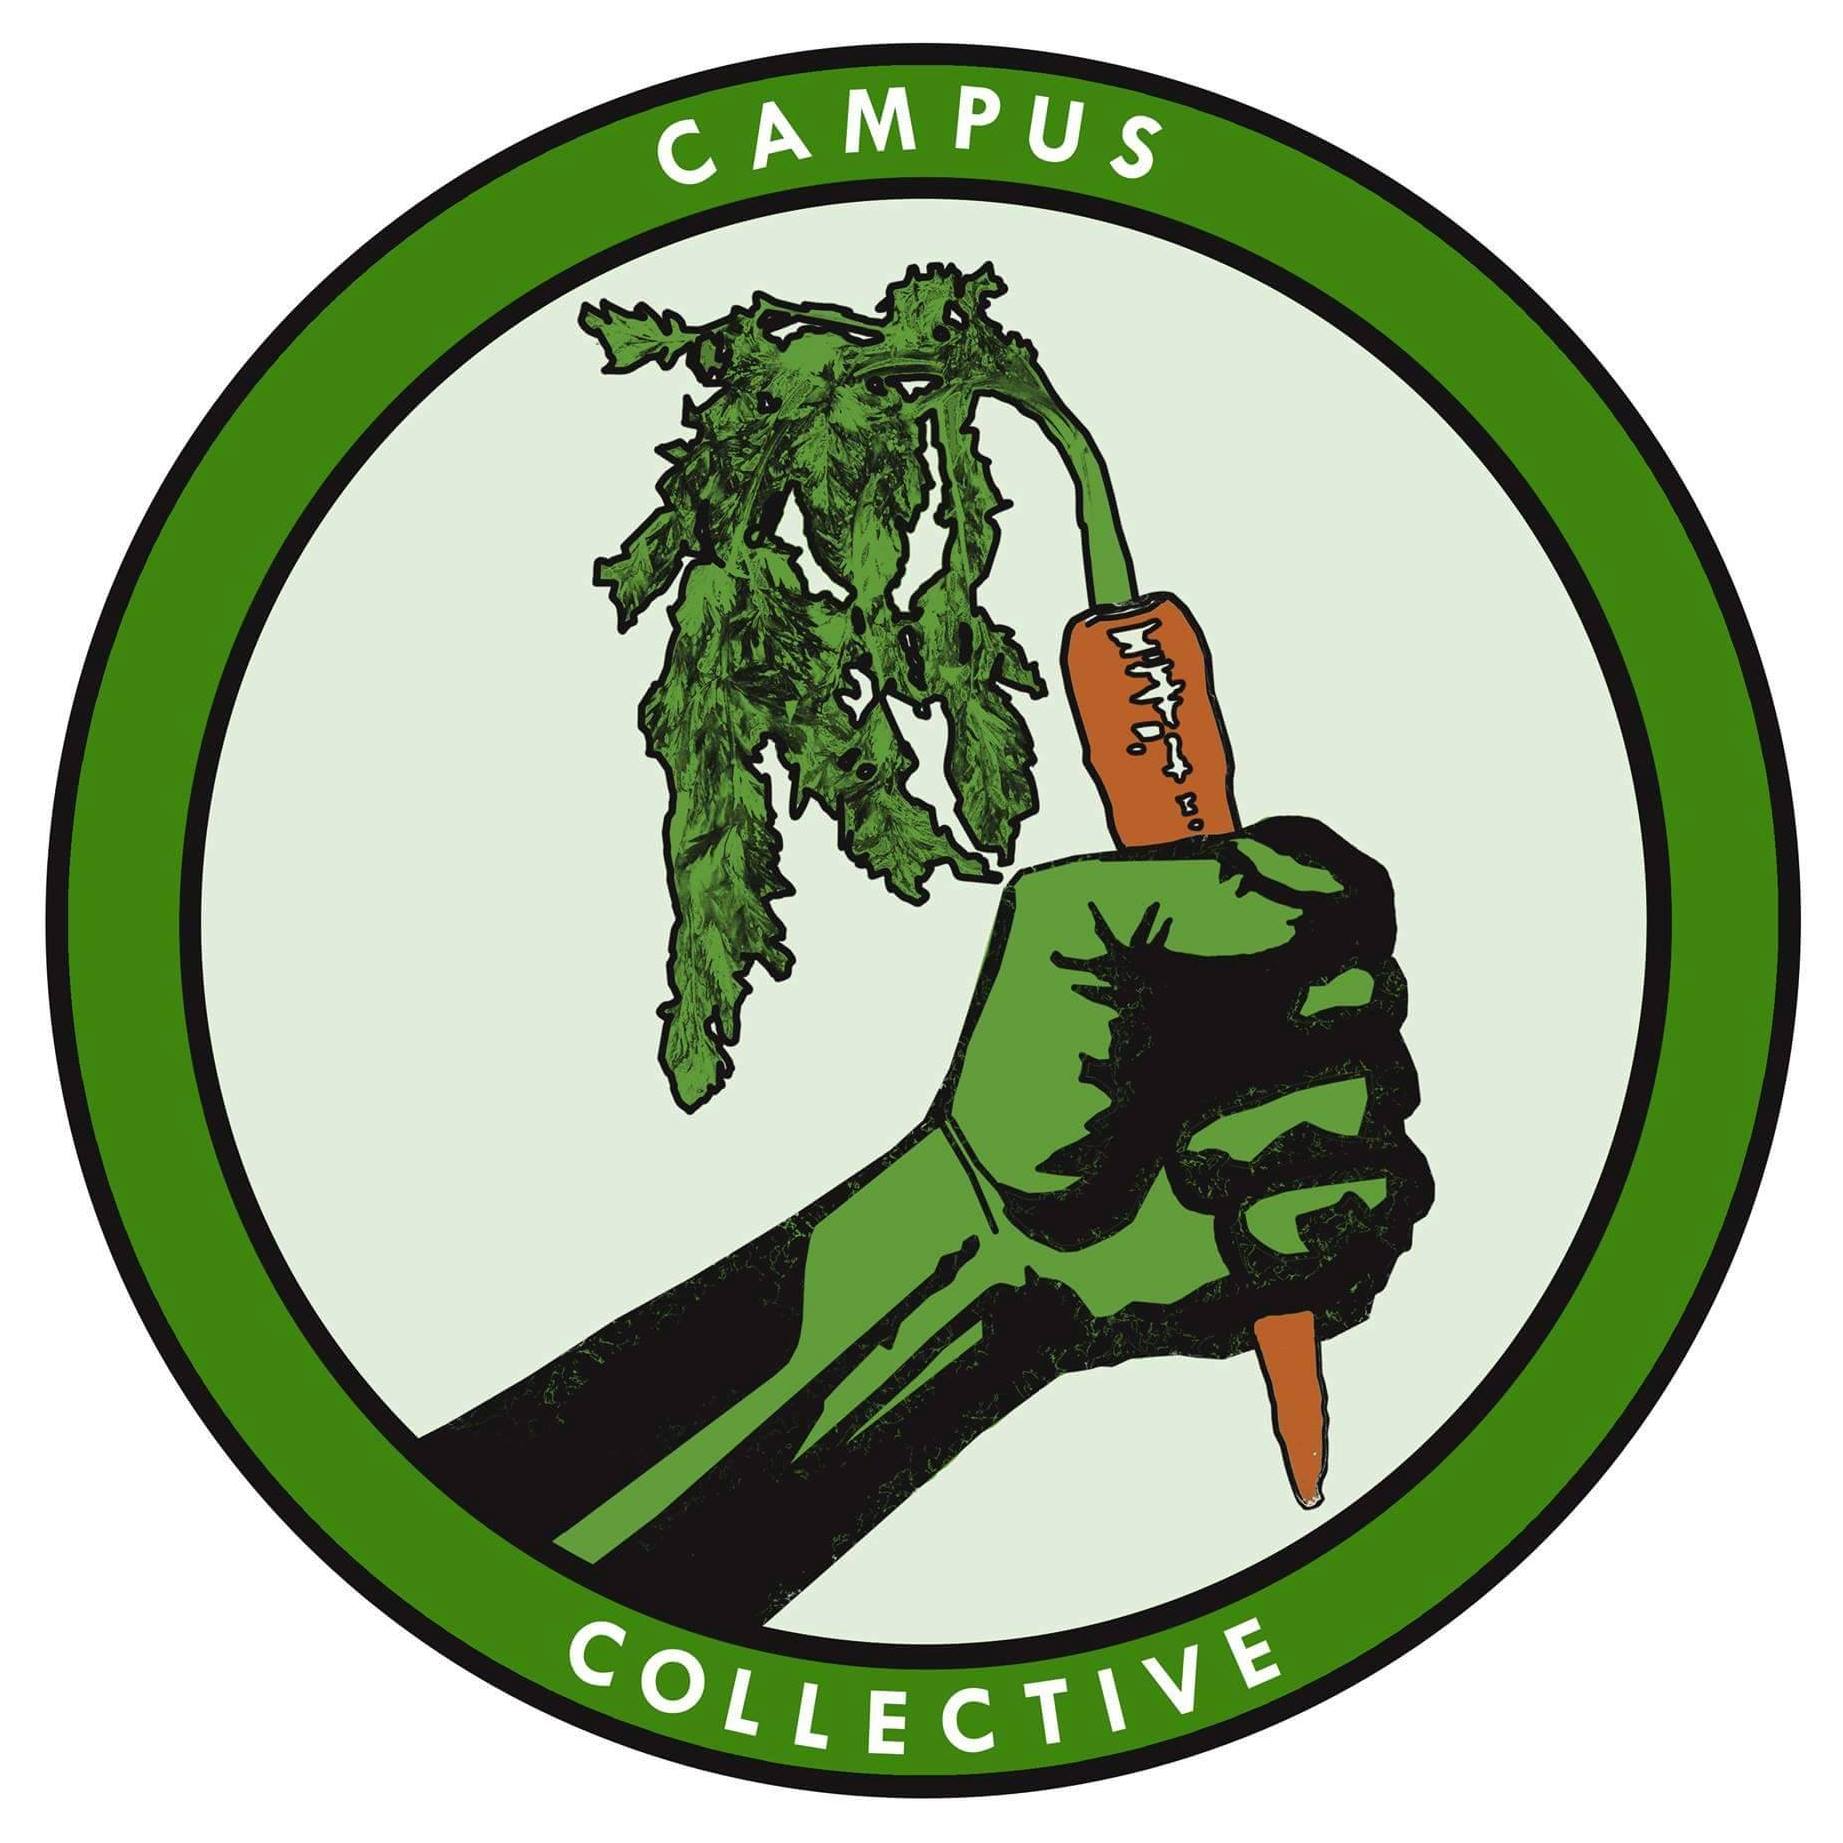 Campus Collective